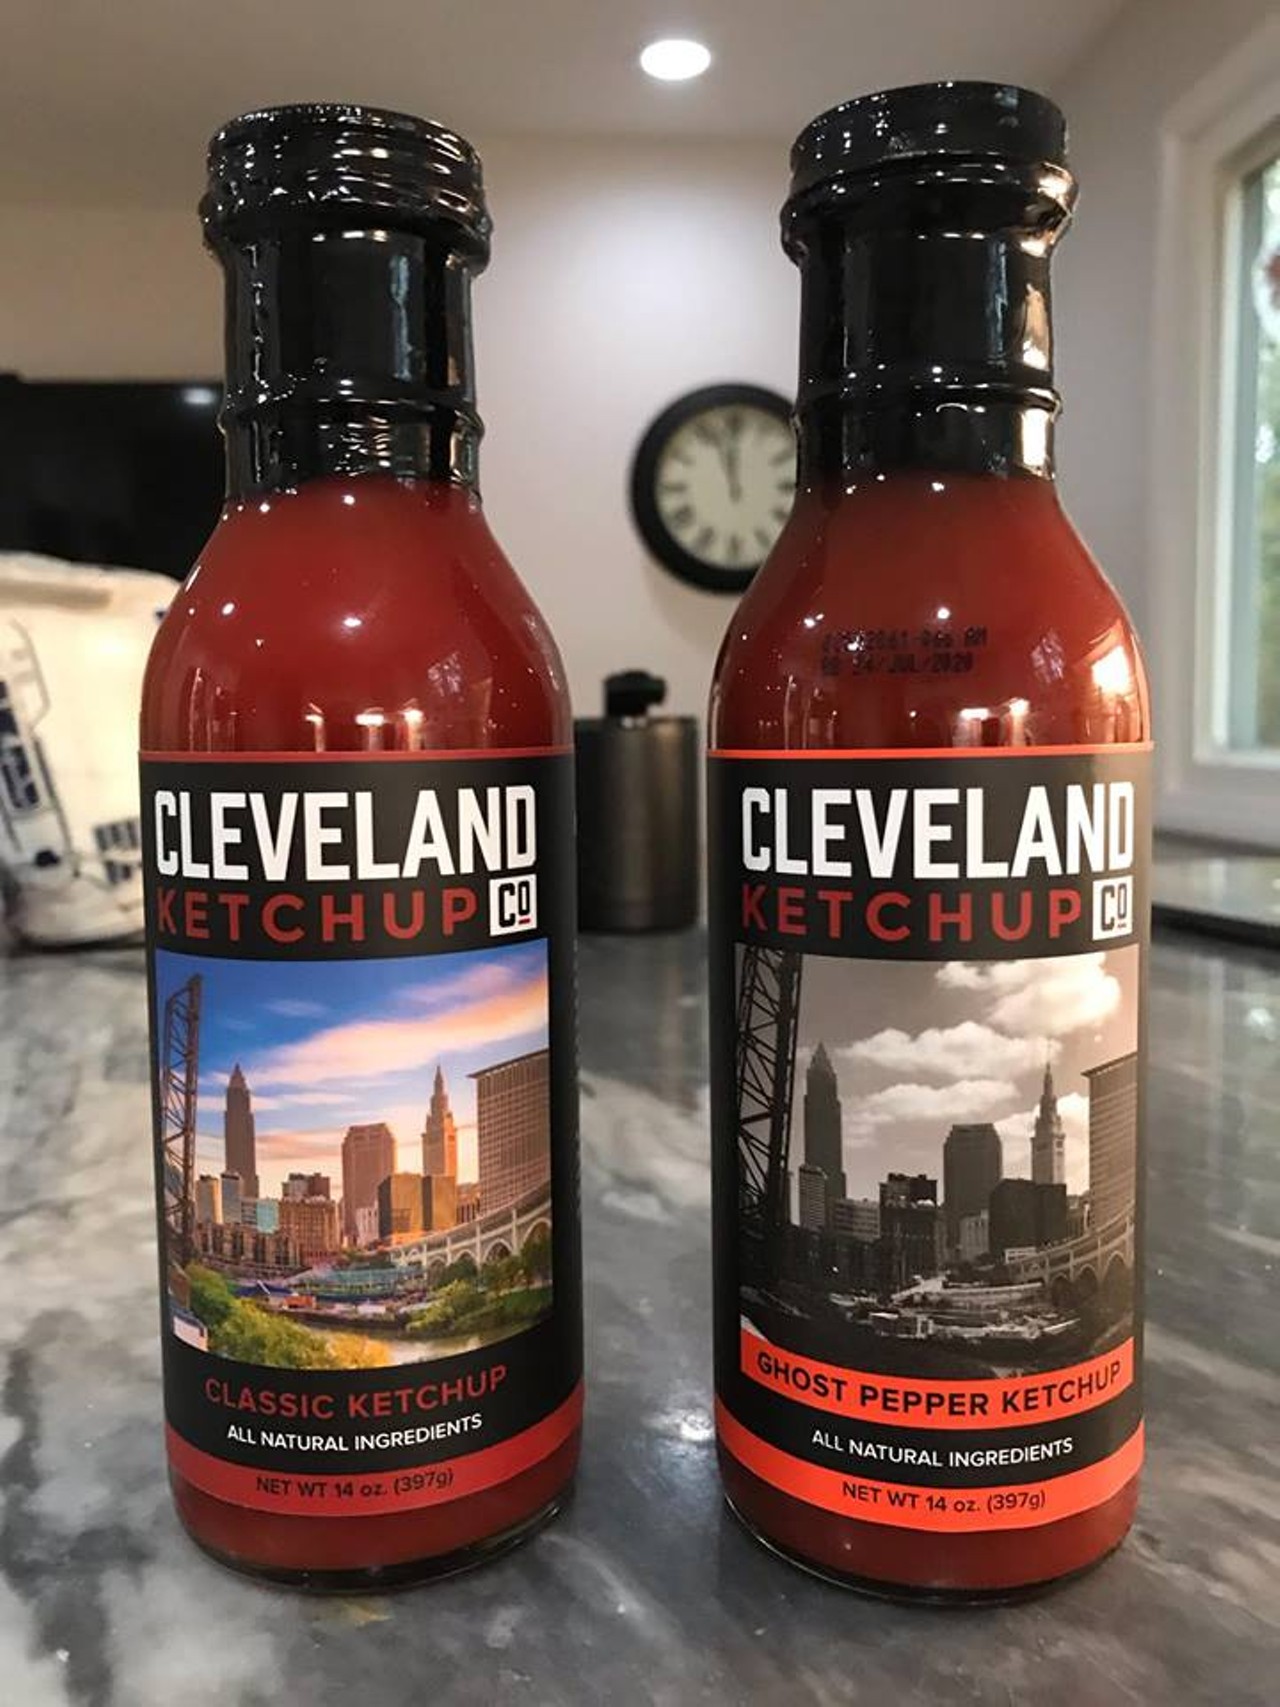 Cleveland Ketchup 
Found at: In The 216, 11512 Clifton Blvd. 
$7
Cleveland Ketchup Company is a new local family-run venture, dedicated to providing ketchup using quality, natural ingredients with absolutely no high-fructose corn syrup. The ketchup is available in classic and ghost pepper flavors.